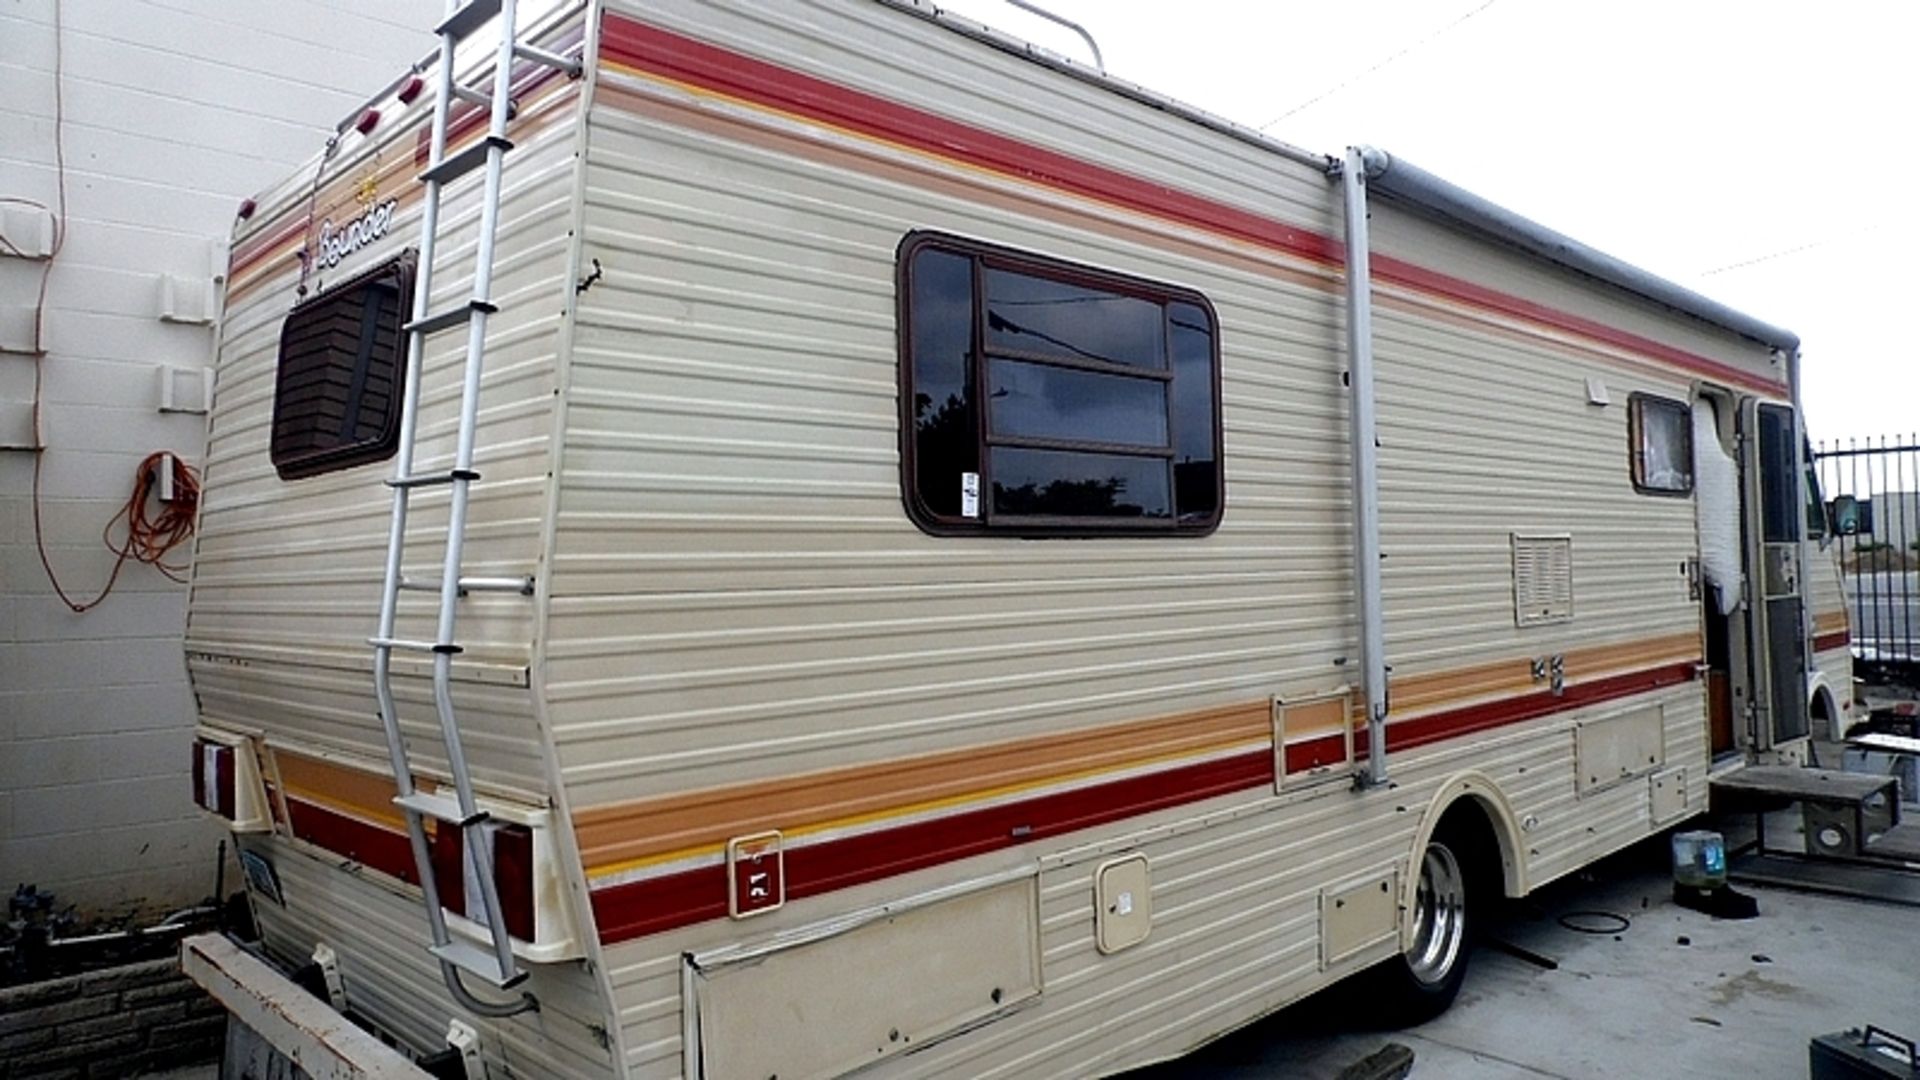 BLOUNDER 34 FT. MOTOR HOME (49,000 MILES) - Image 2 of 2